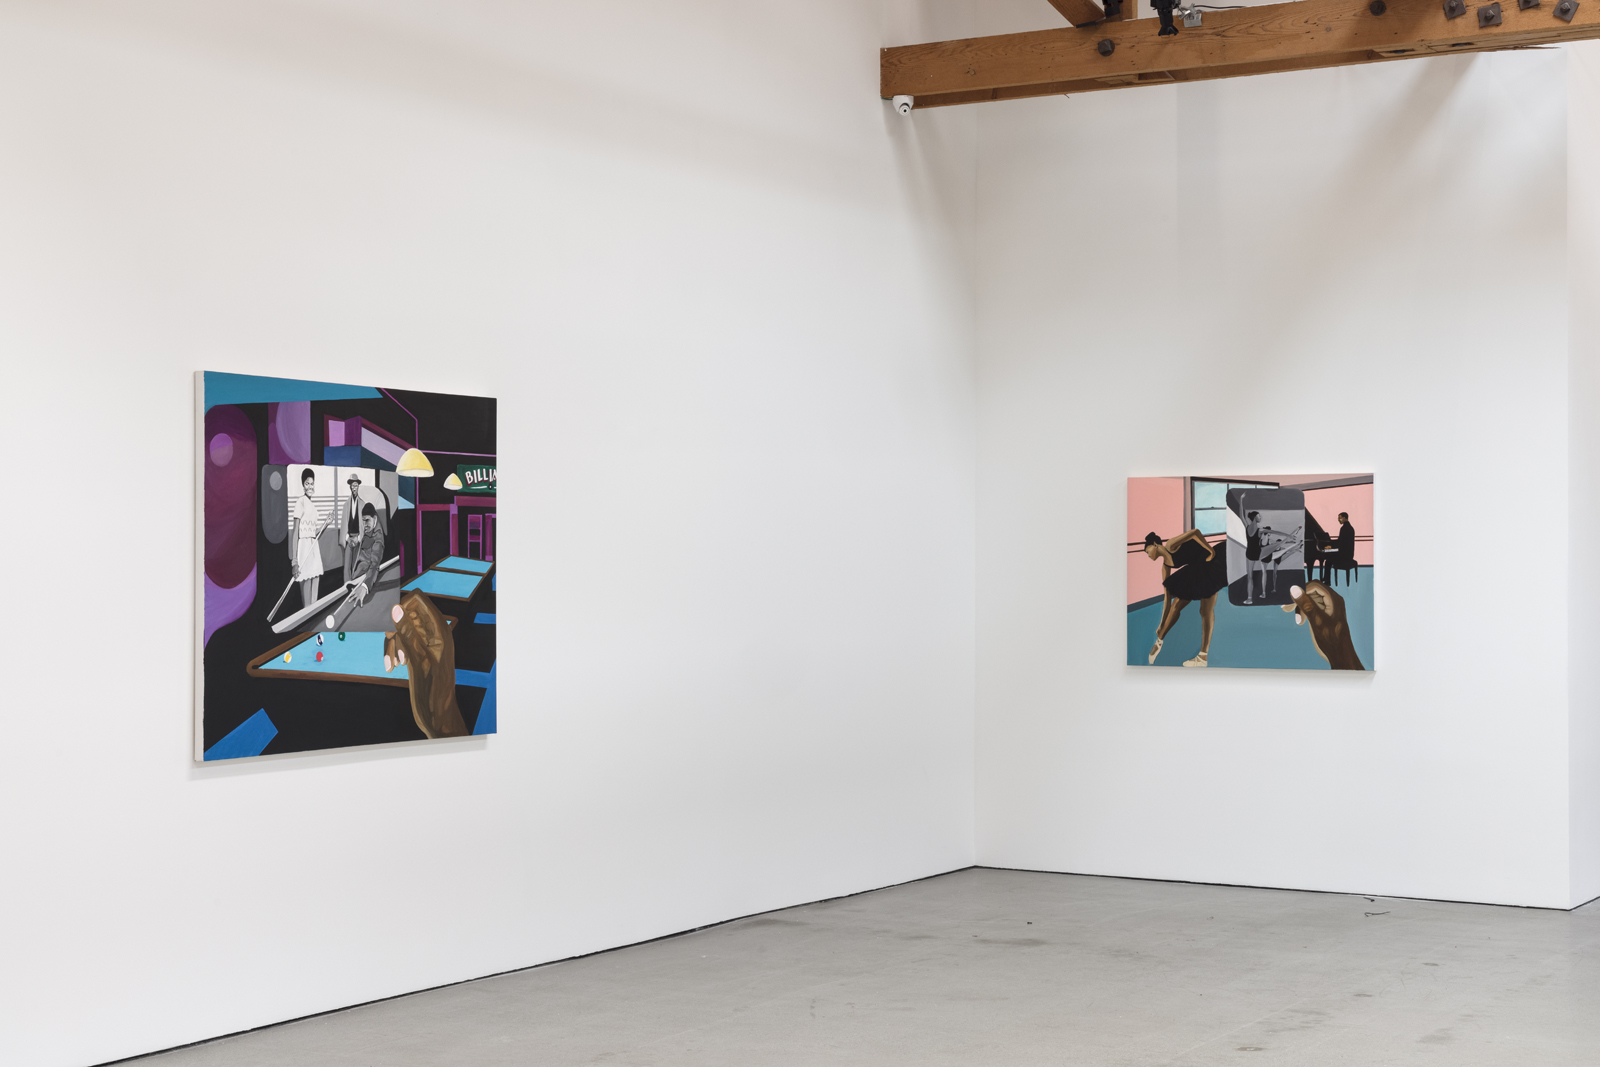 installation view of blitz bazawule a moment in time with 2 paintings hanging in gallery space